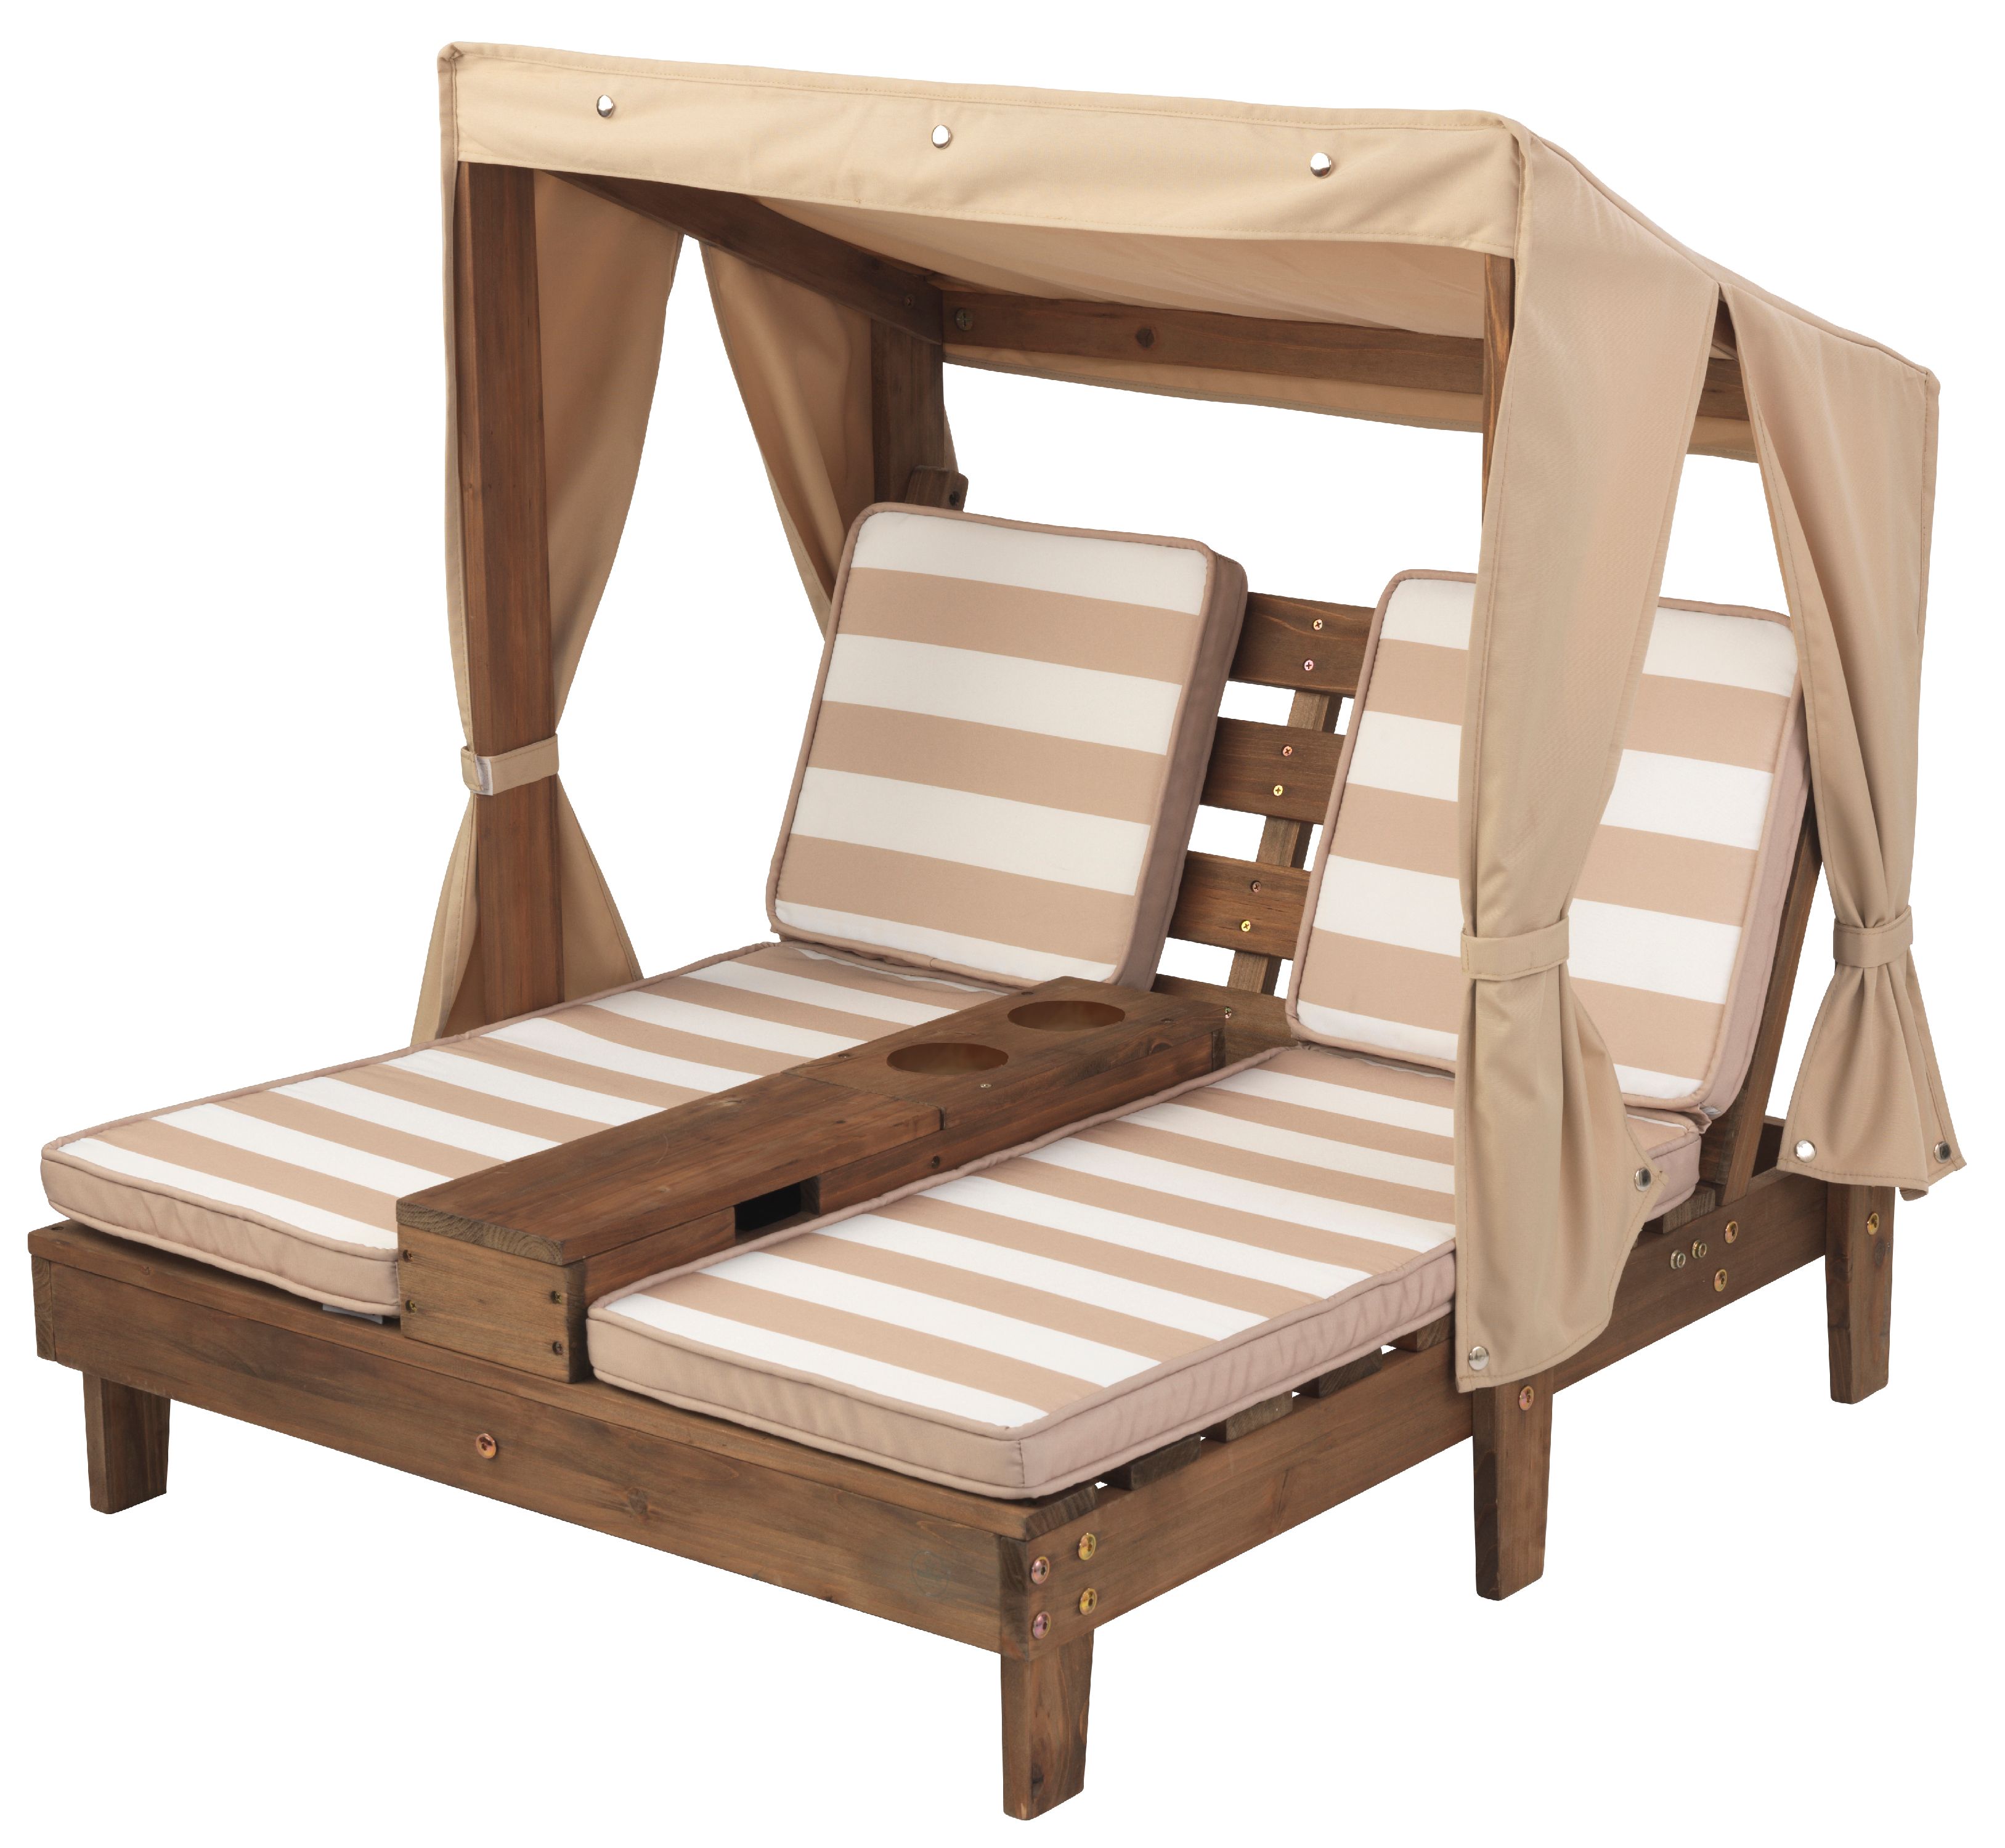 KidKraft Double Chaise Lounge with Cupholders